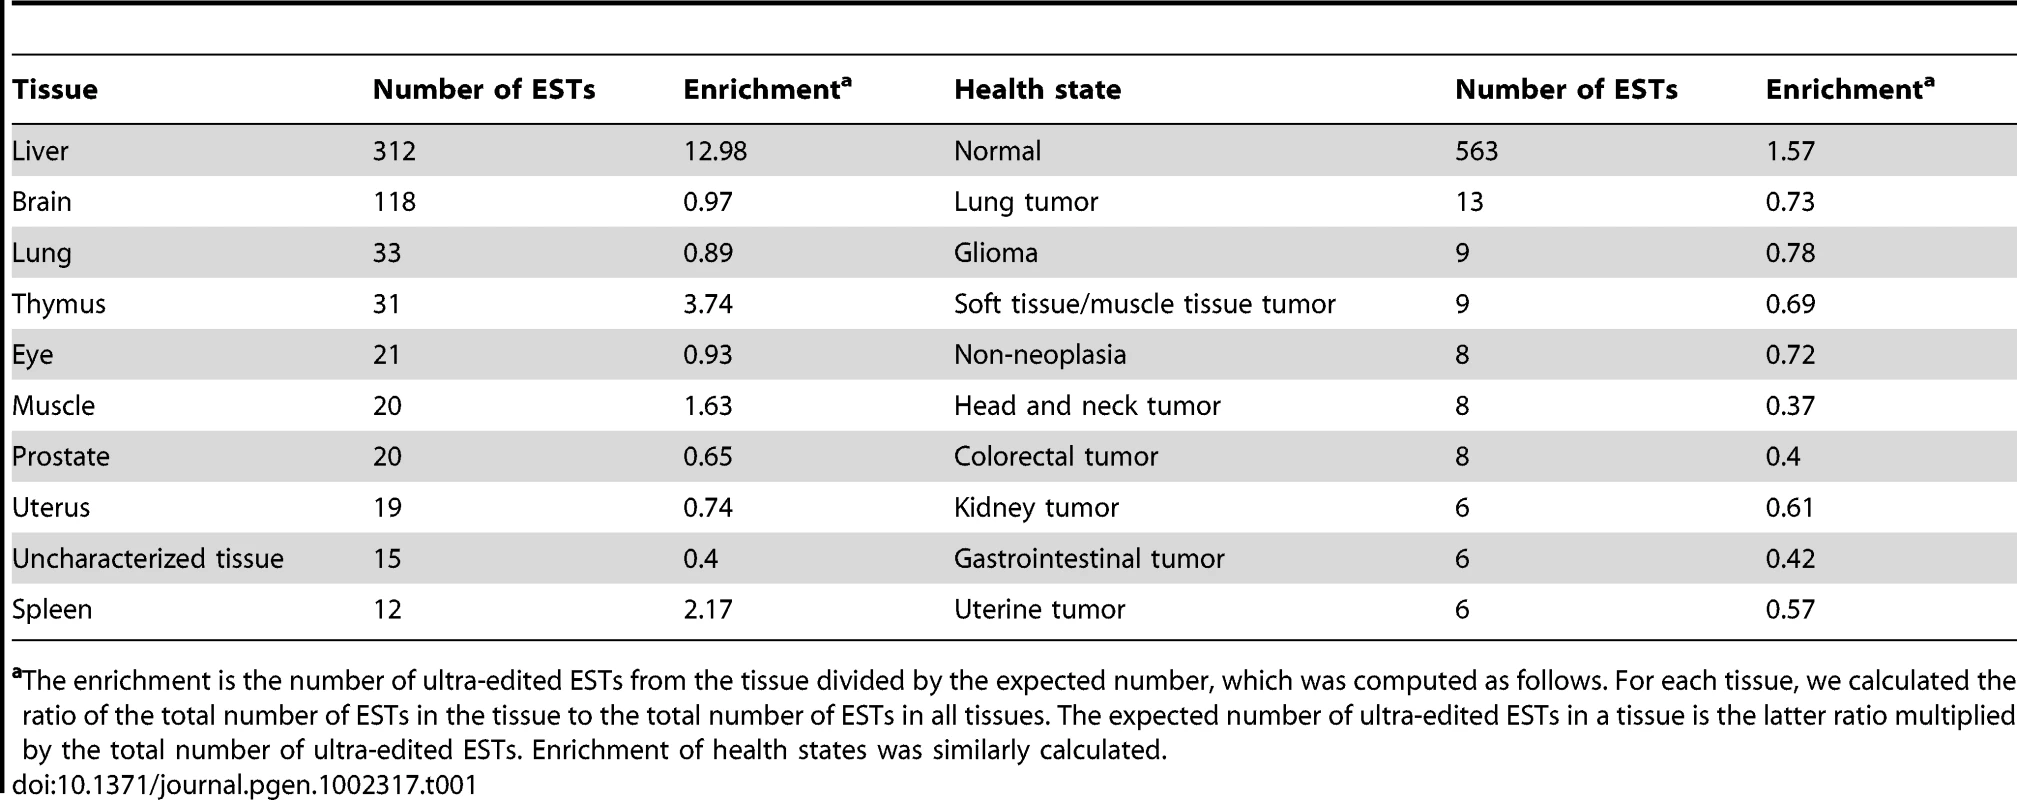 Top tissues and health states containing ultra-edited ESTs.